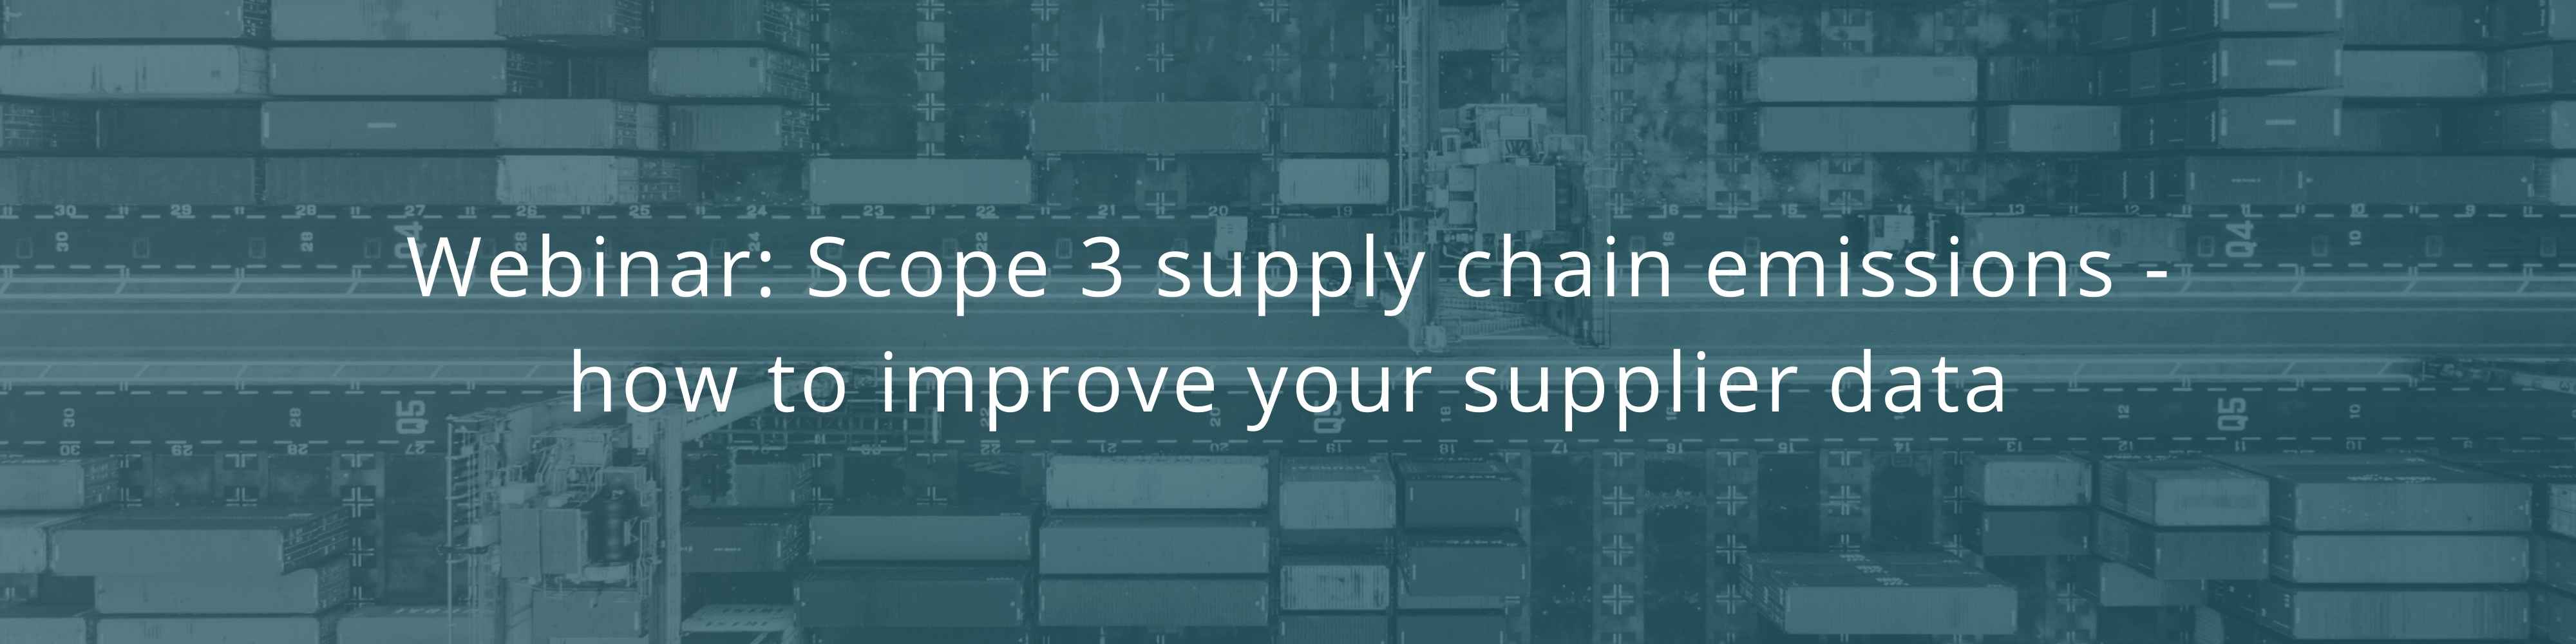 Scope 3 supply chain emissions – how to improve your supplier data